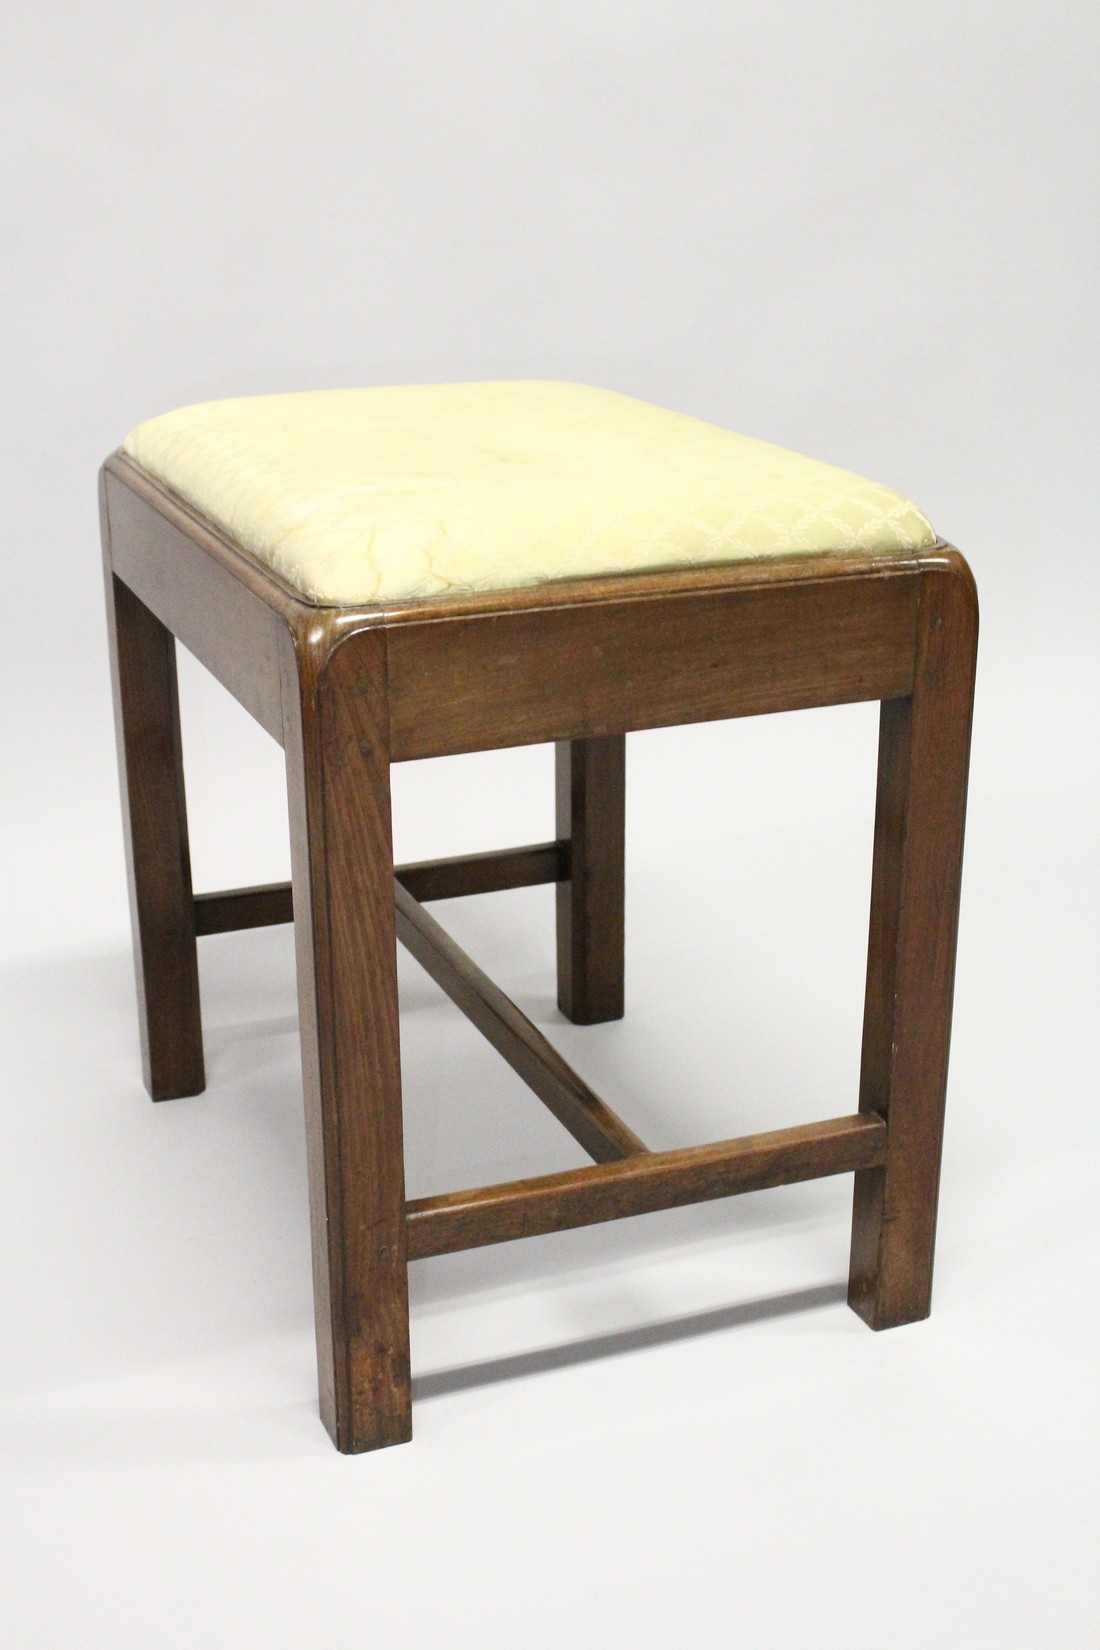 A GEORGE III MAHOGANY RECTANGULAR STOOL, with drop-in seat on moulded square legs united by - Image 4 of 7